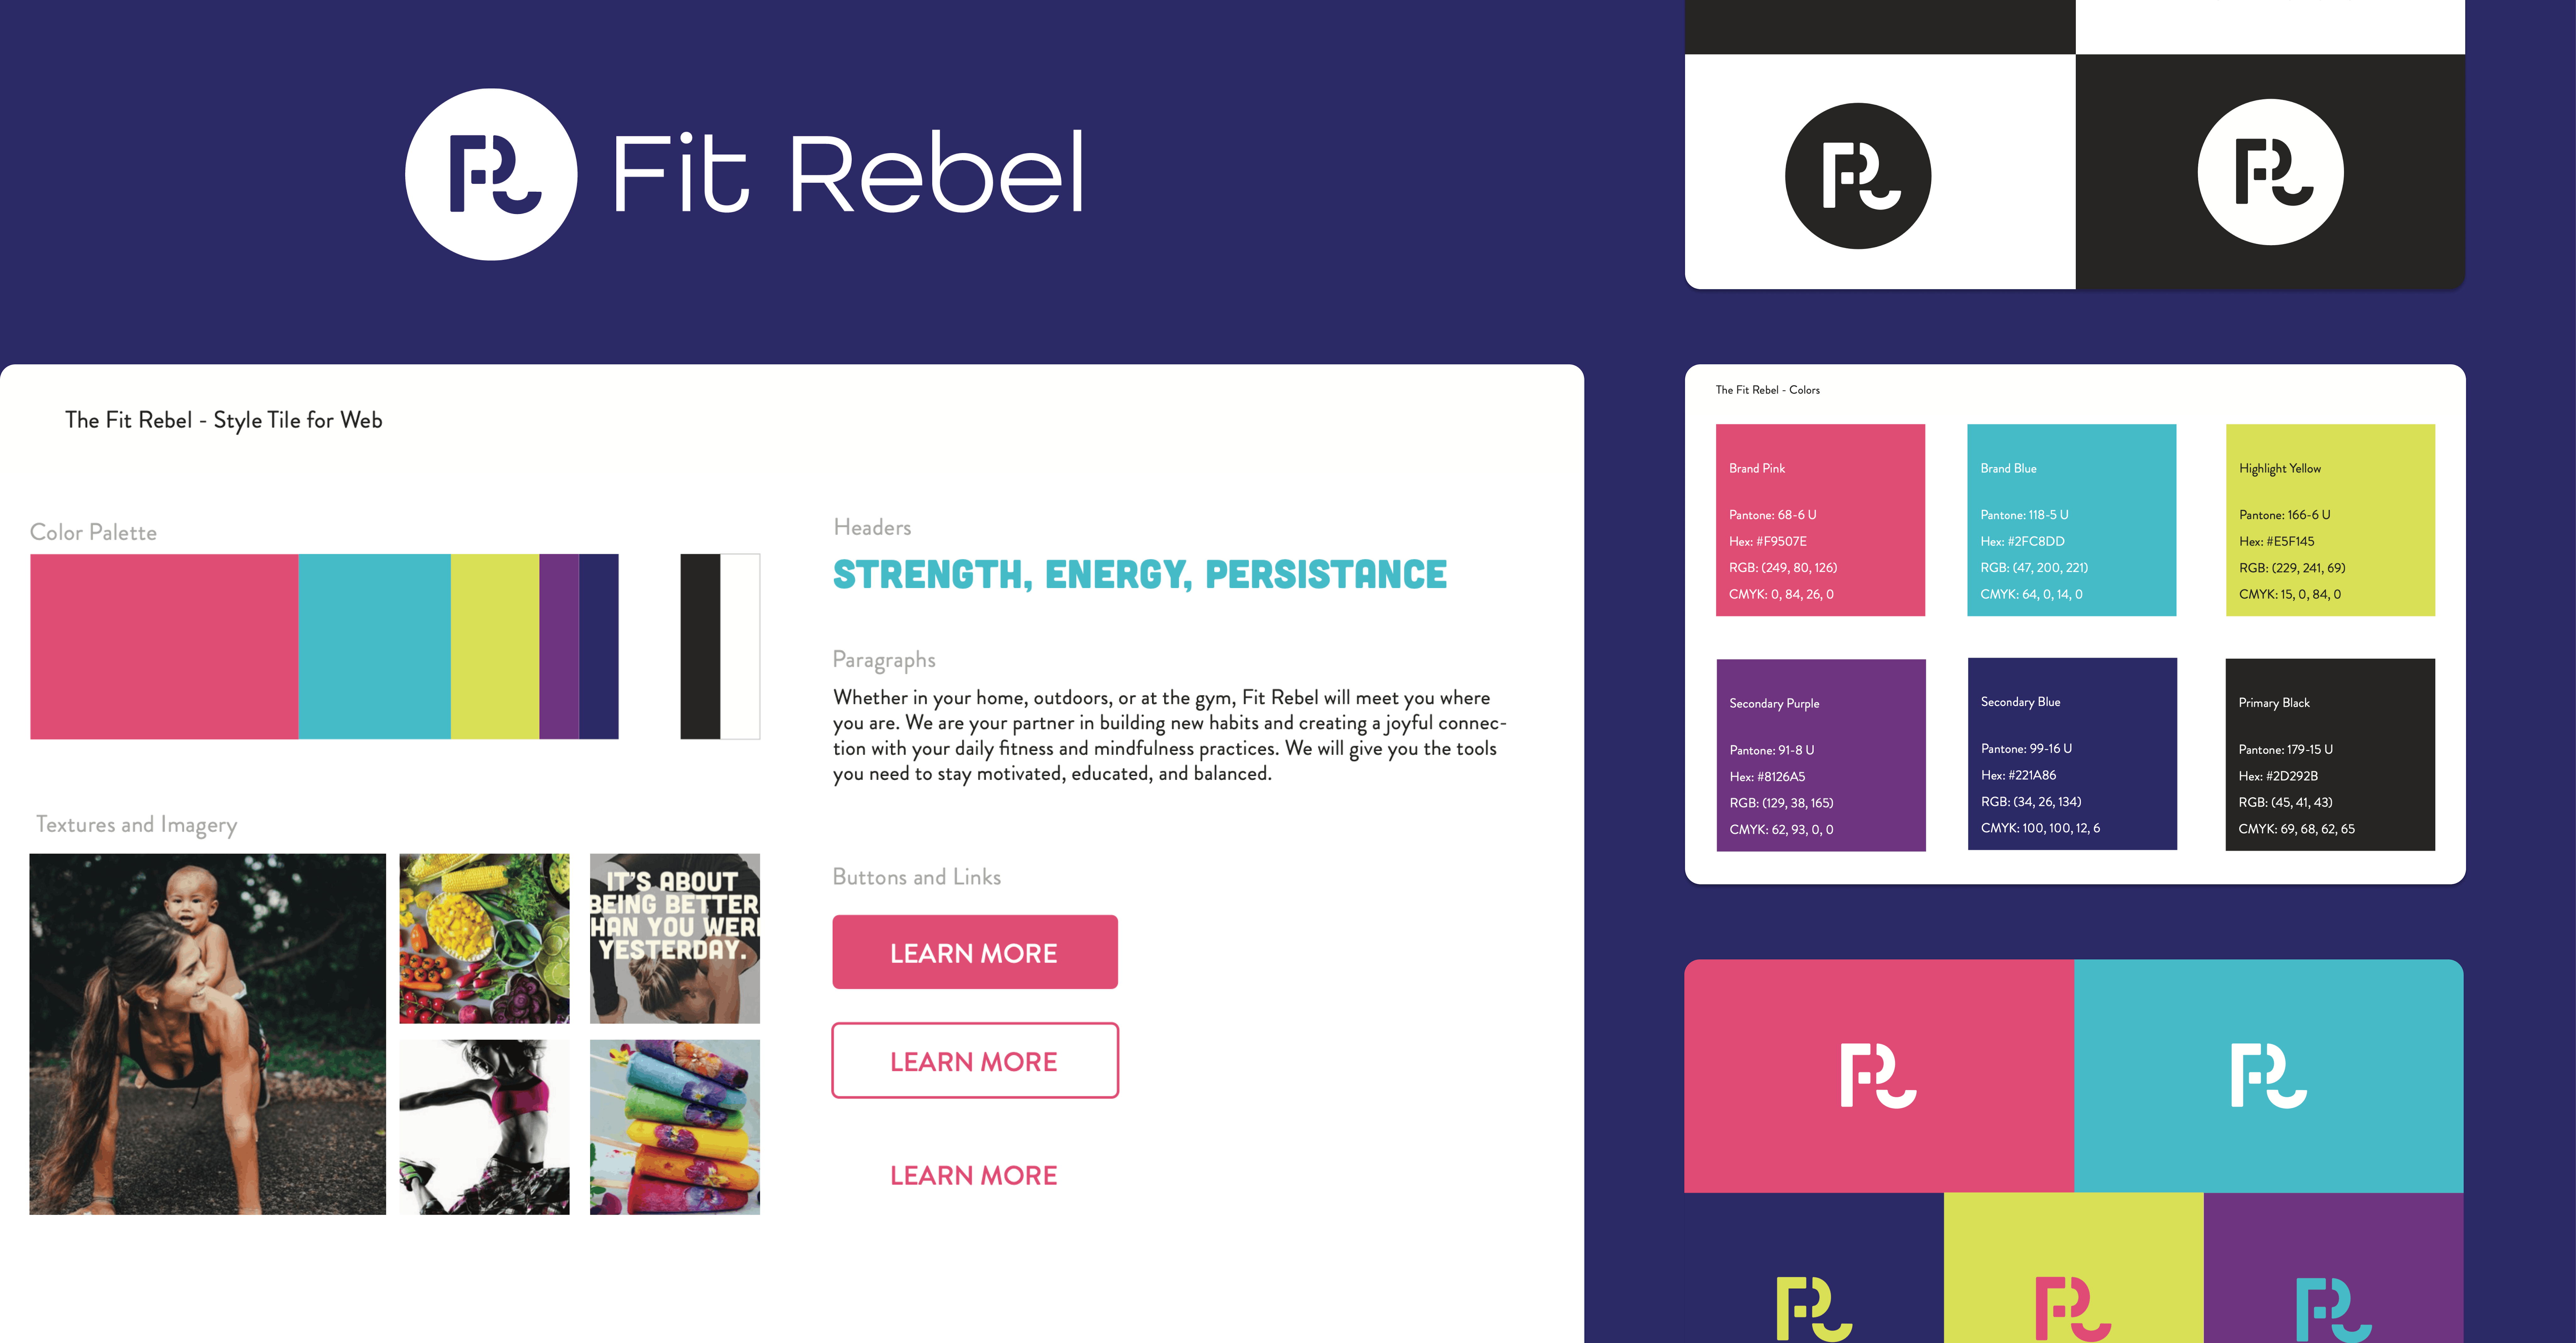 Brand elements organized for Fit Rebel like colors and logos